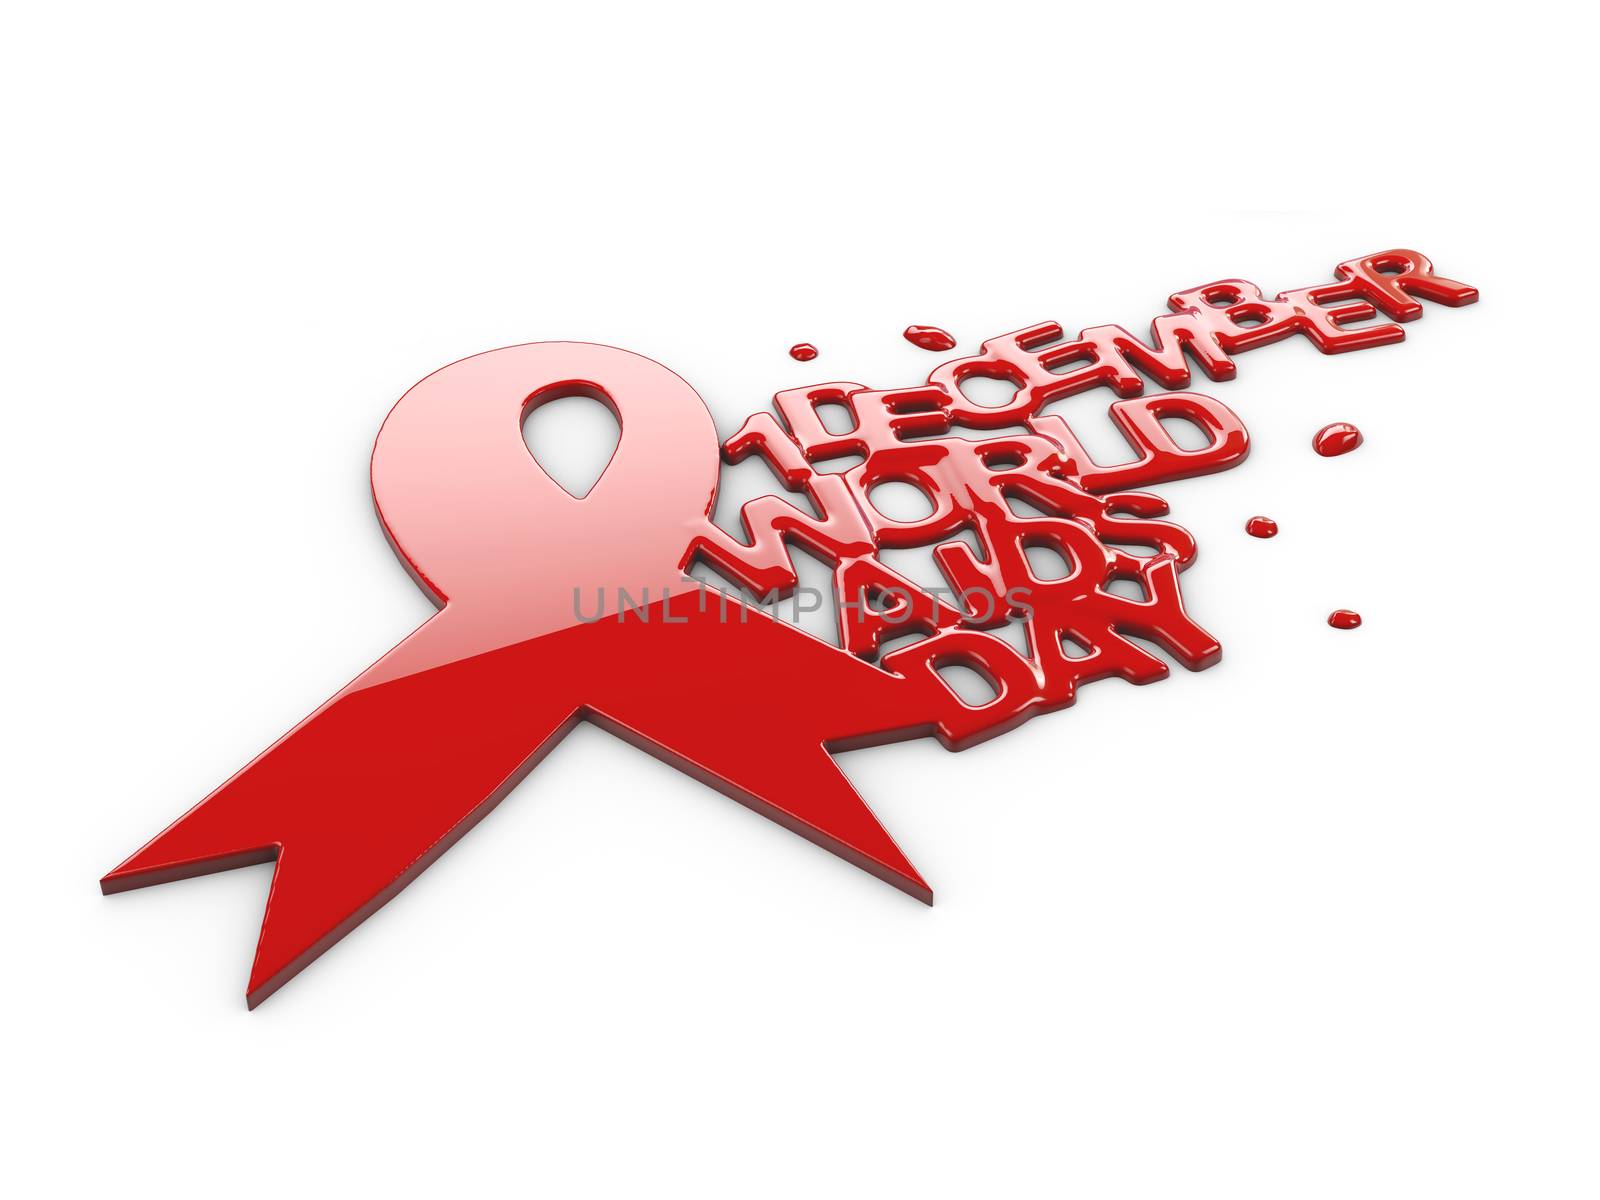 Aids Awareness Red Ribbon. World Aids Day concept. 3d Illustration by tussik